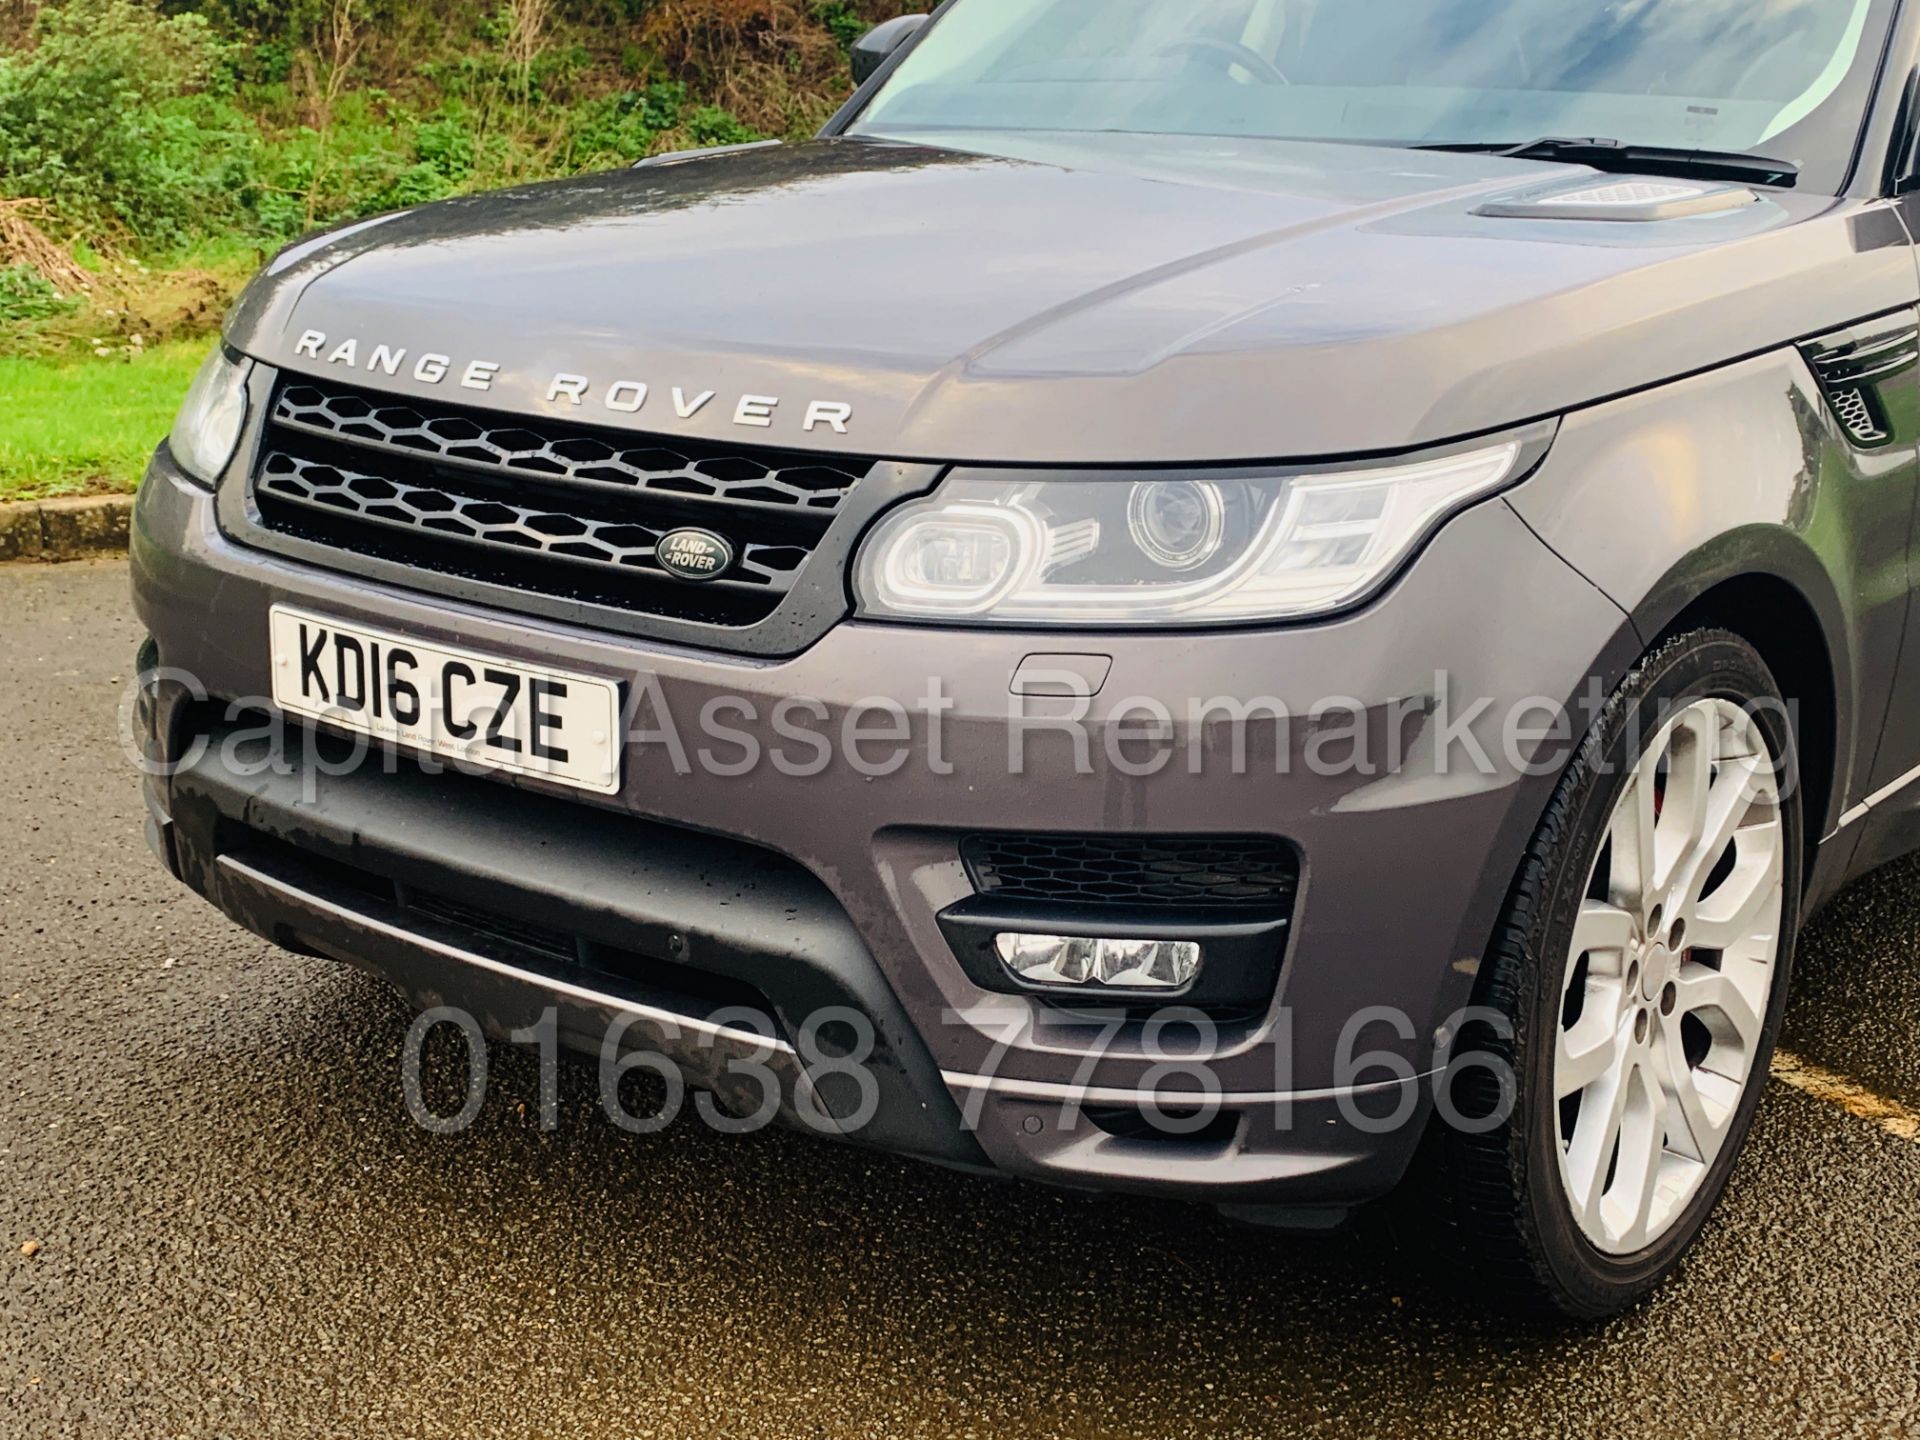 (ON SALE) RANGE ROVER SPORT 3.0 SDV6 *AUTOBIOGRAPHY DYNAMIC*AUTO *FULLY LOADED* MONSTER SPEC *16 REG - Image 14 of 70